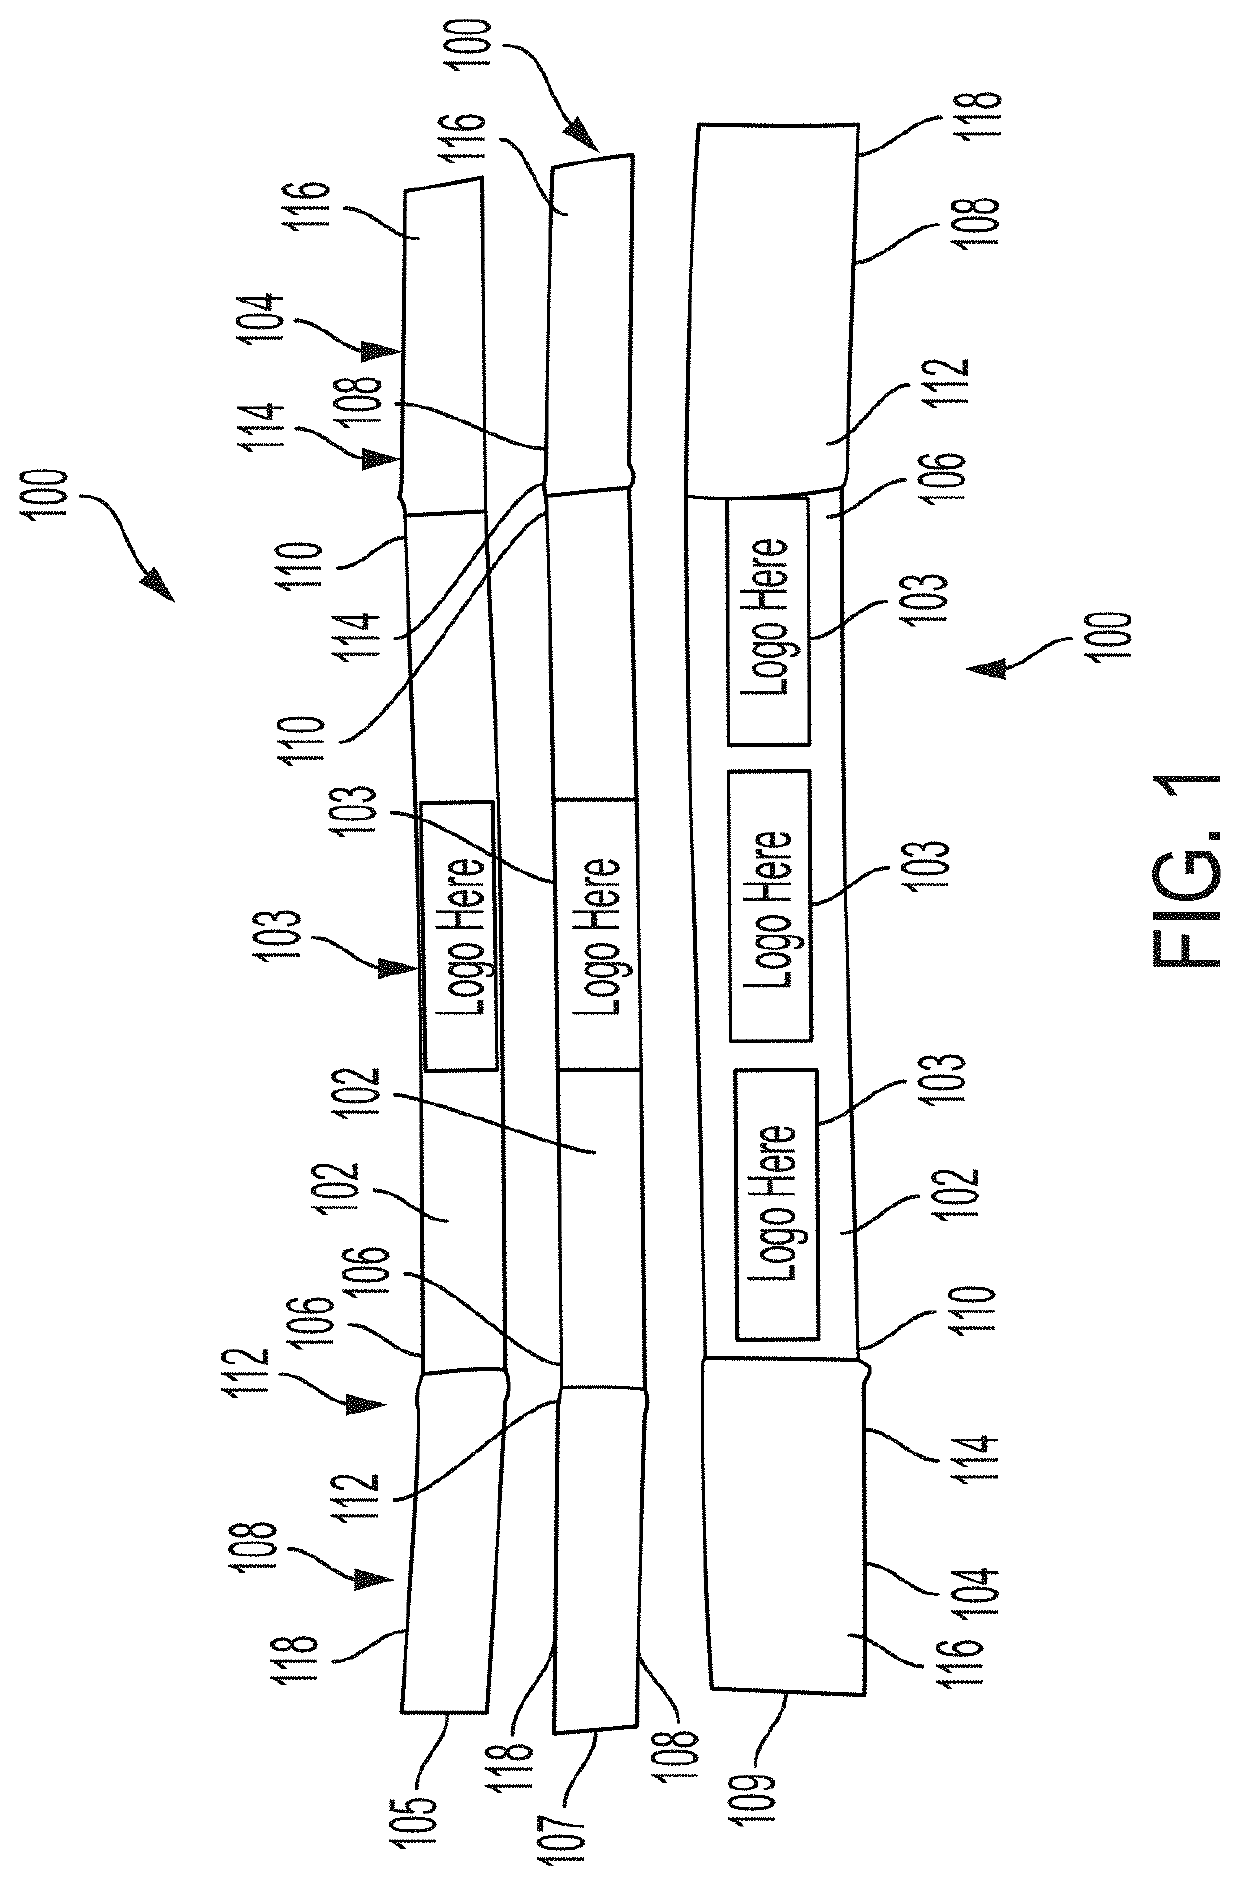 Mobile device elastomeric support strap with visibly identifiable expandable logo imprints